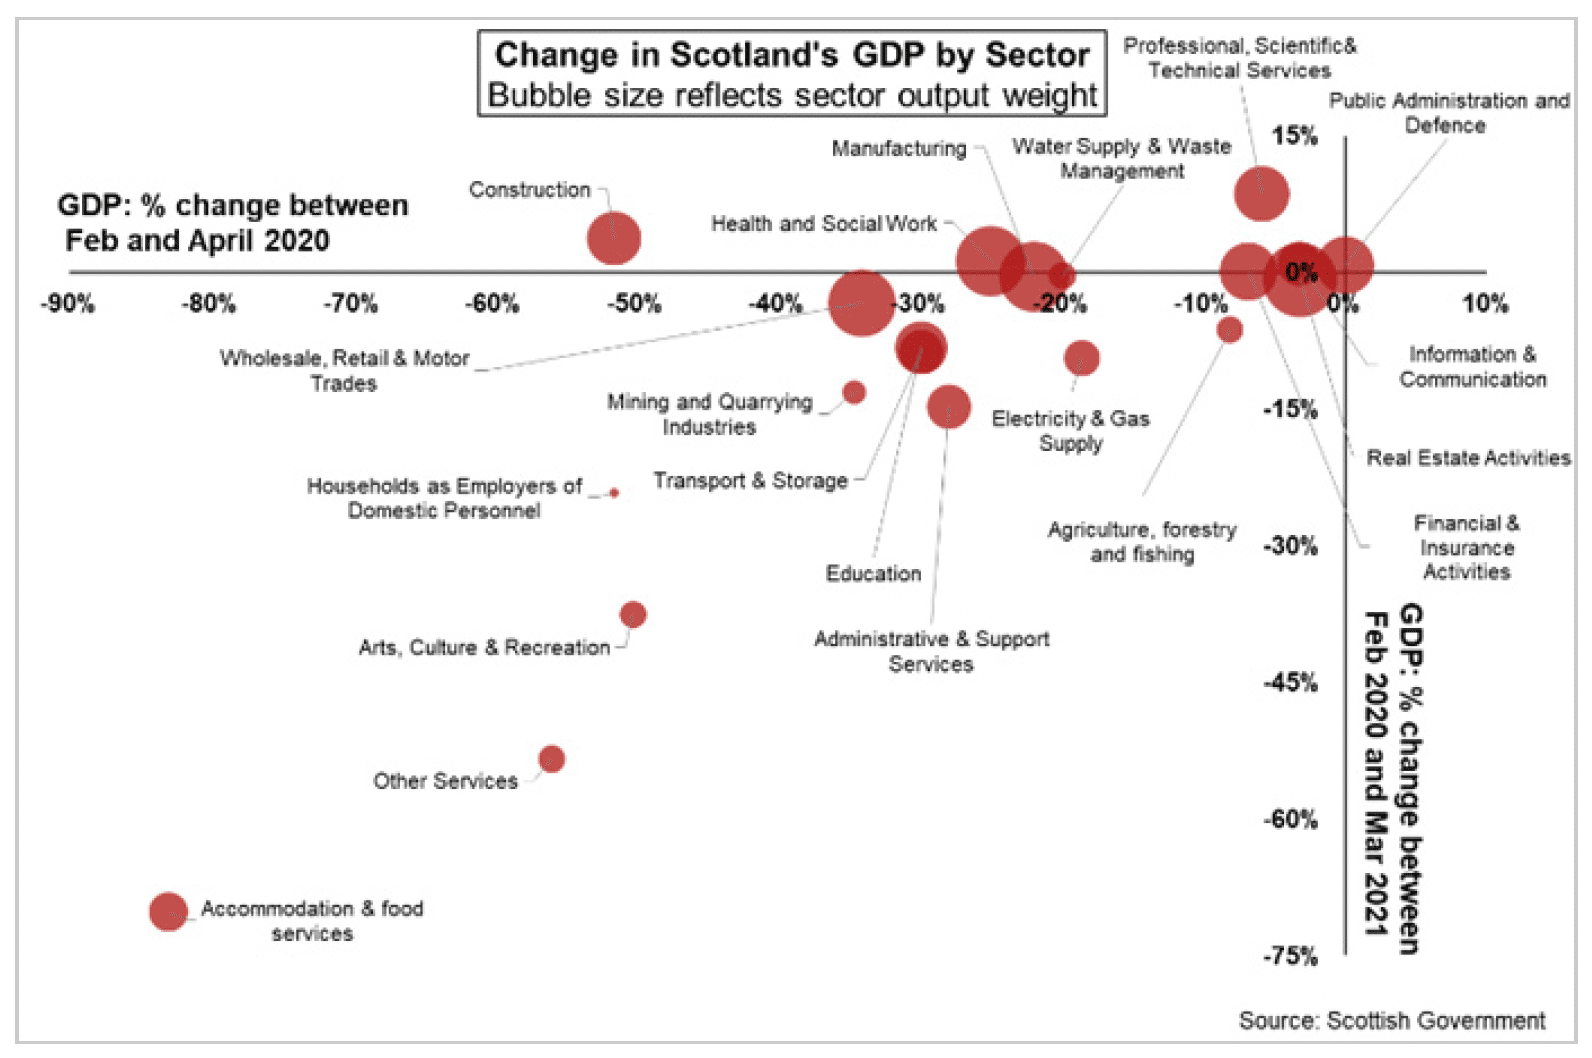 Shows change in Scotland’s GDP by sector, and that recovery from the national lockdown in 2020 is unequal across sectors with some recovering close to pre-pandemic levels whilst others continue to lag behind.